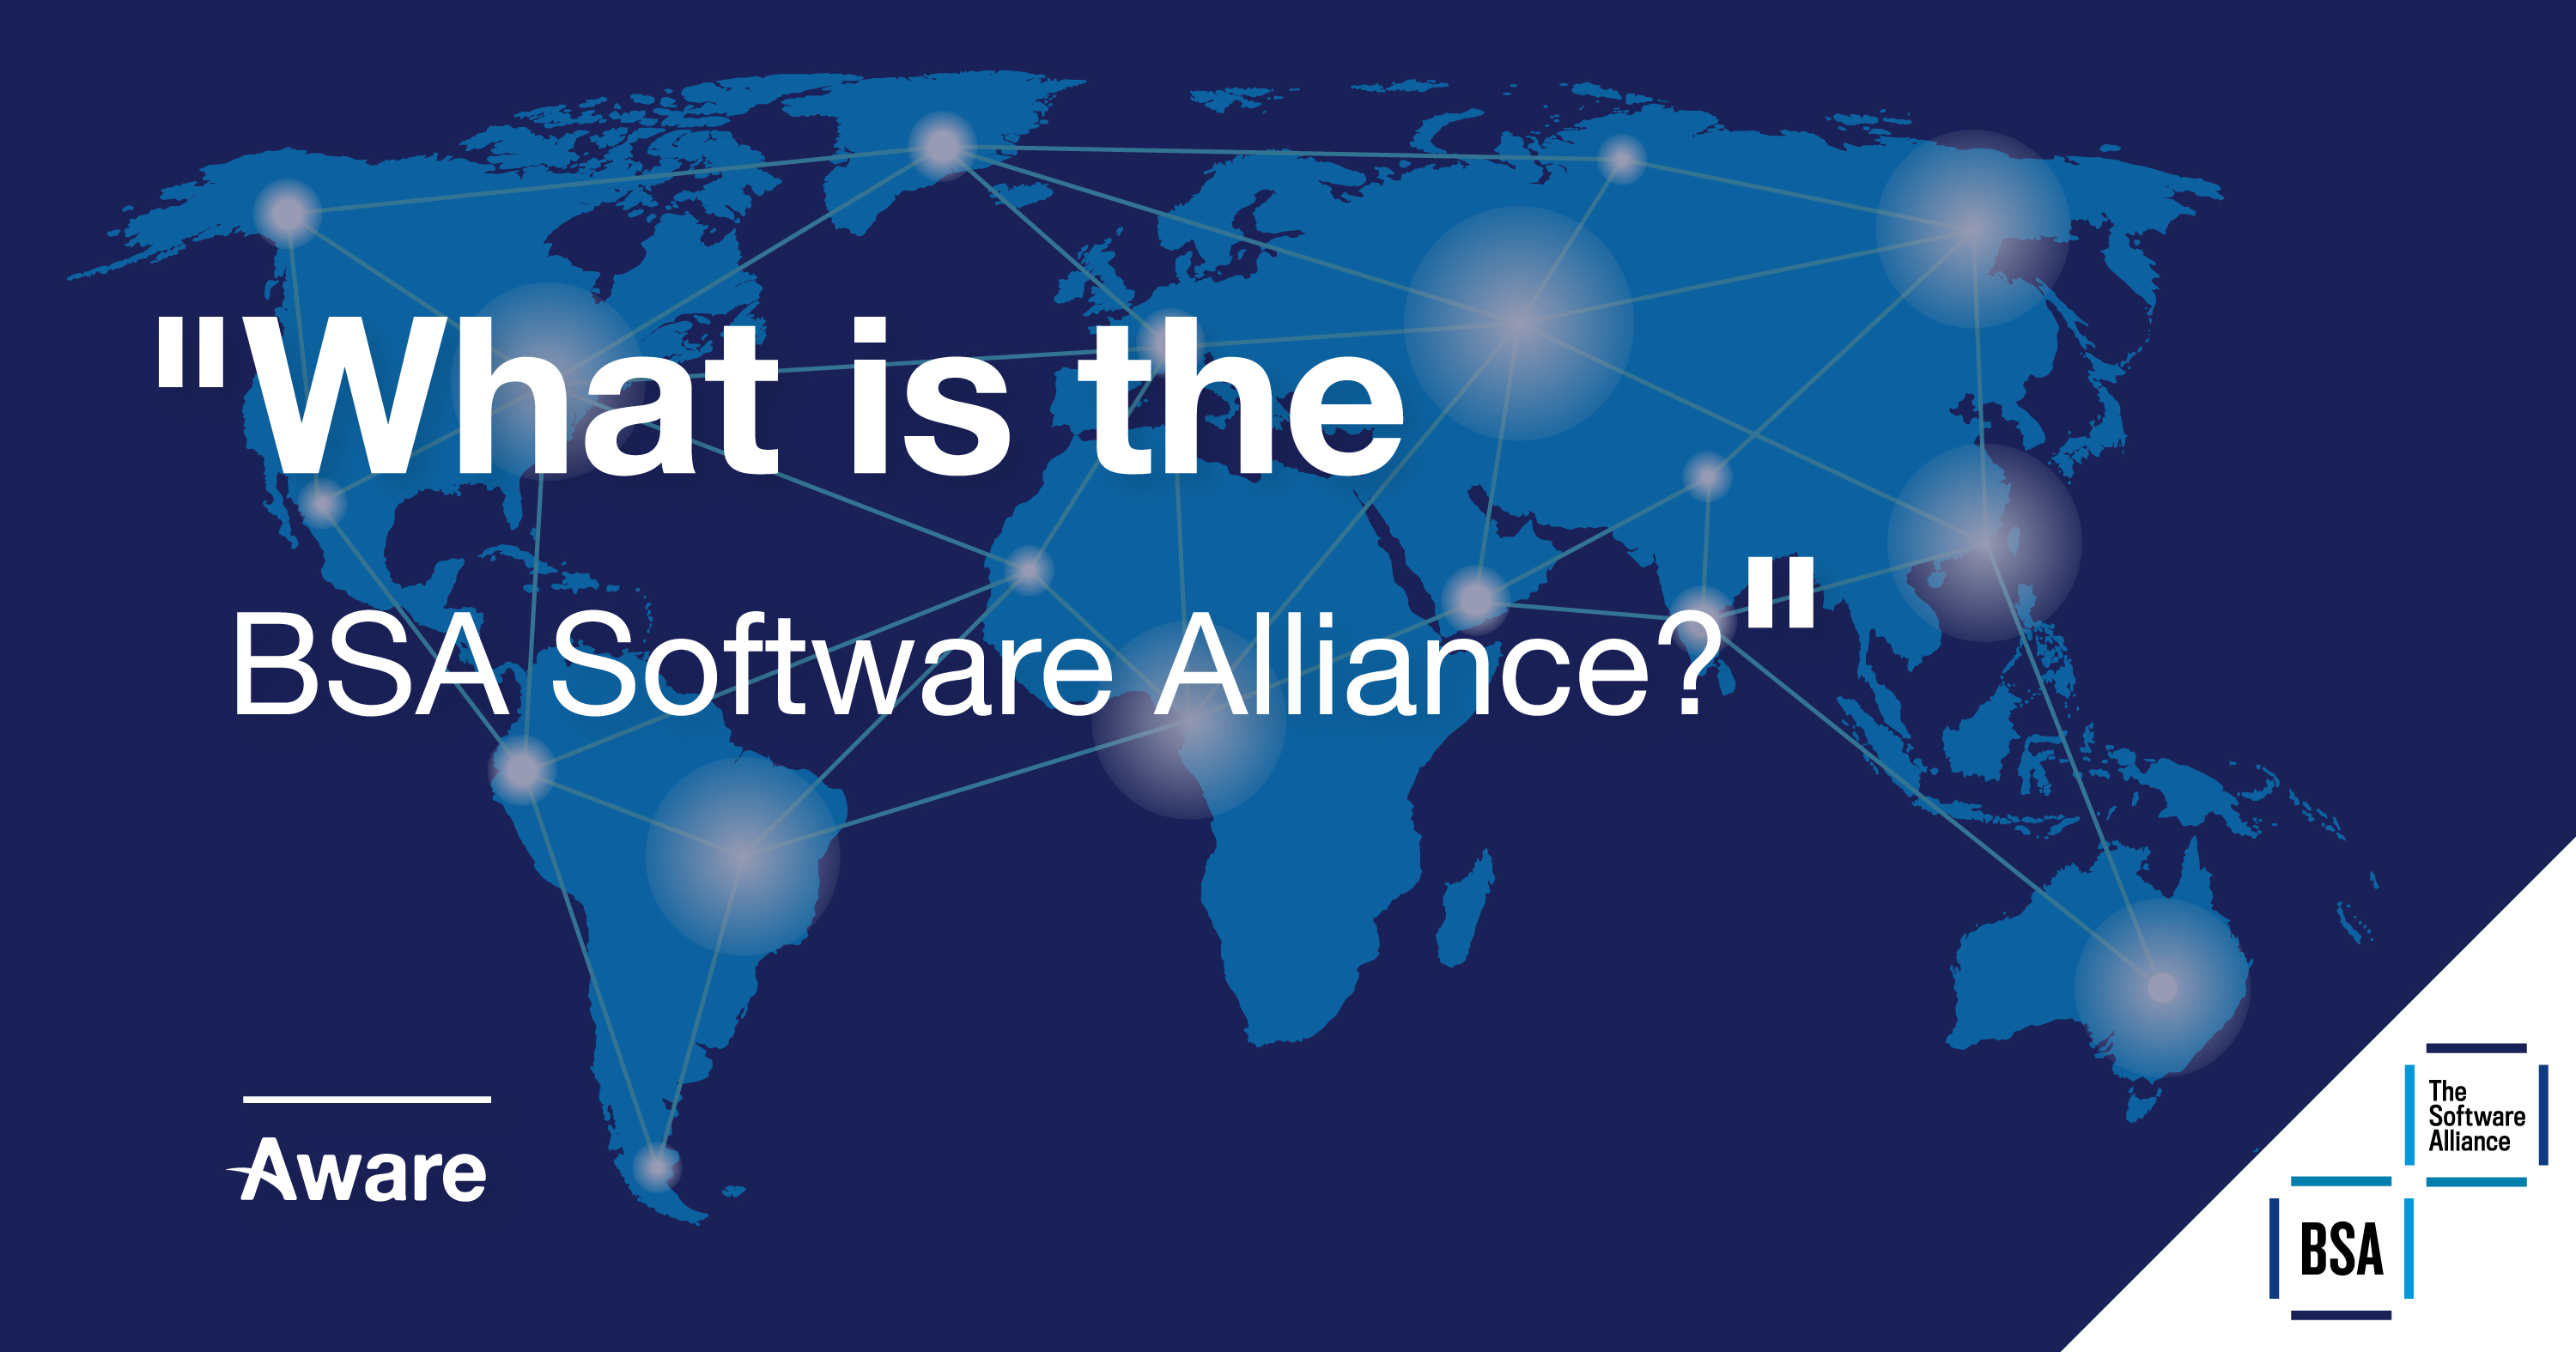 What is the BSA Software Alliance?